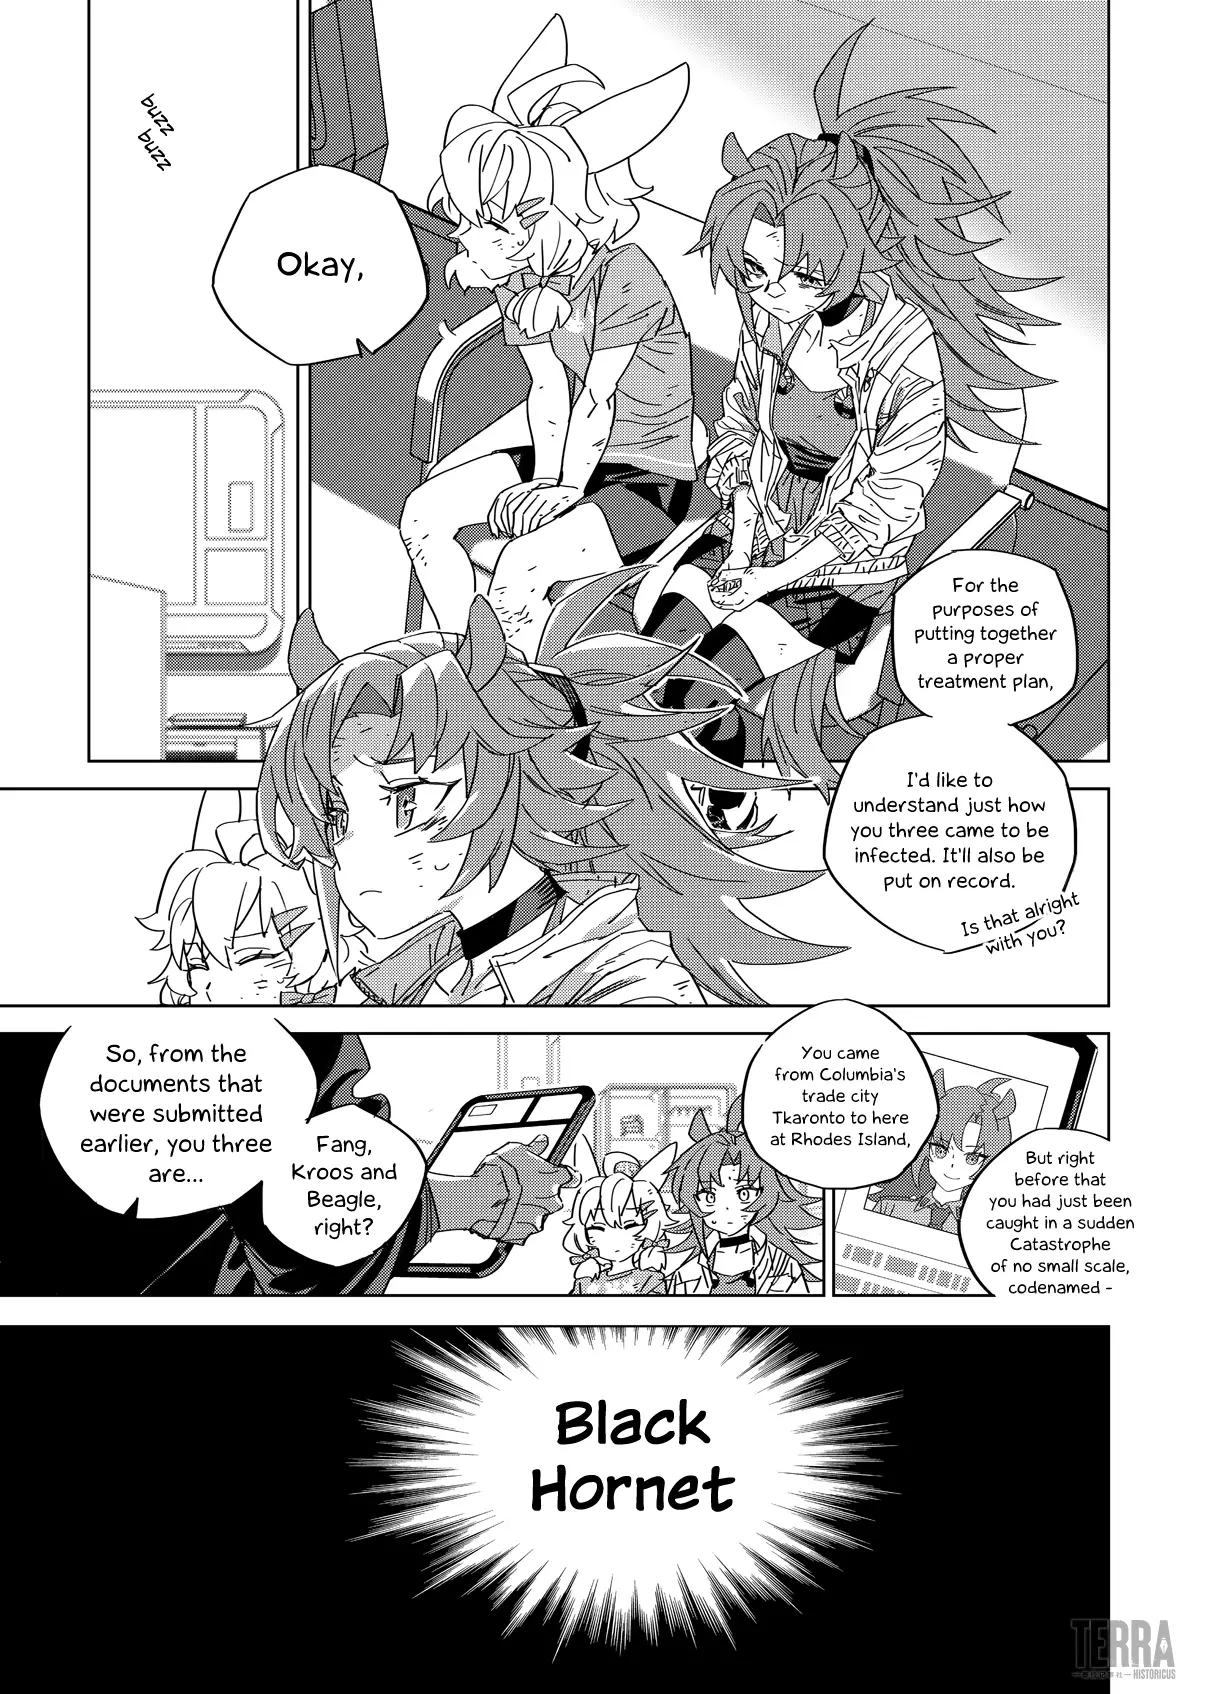 Arknights: A1 Operations Preparation Detachment - 1 page 6-9757e94c